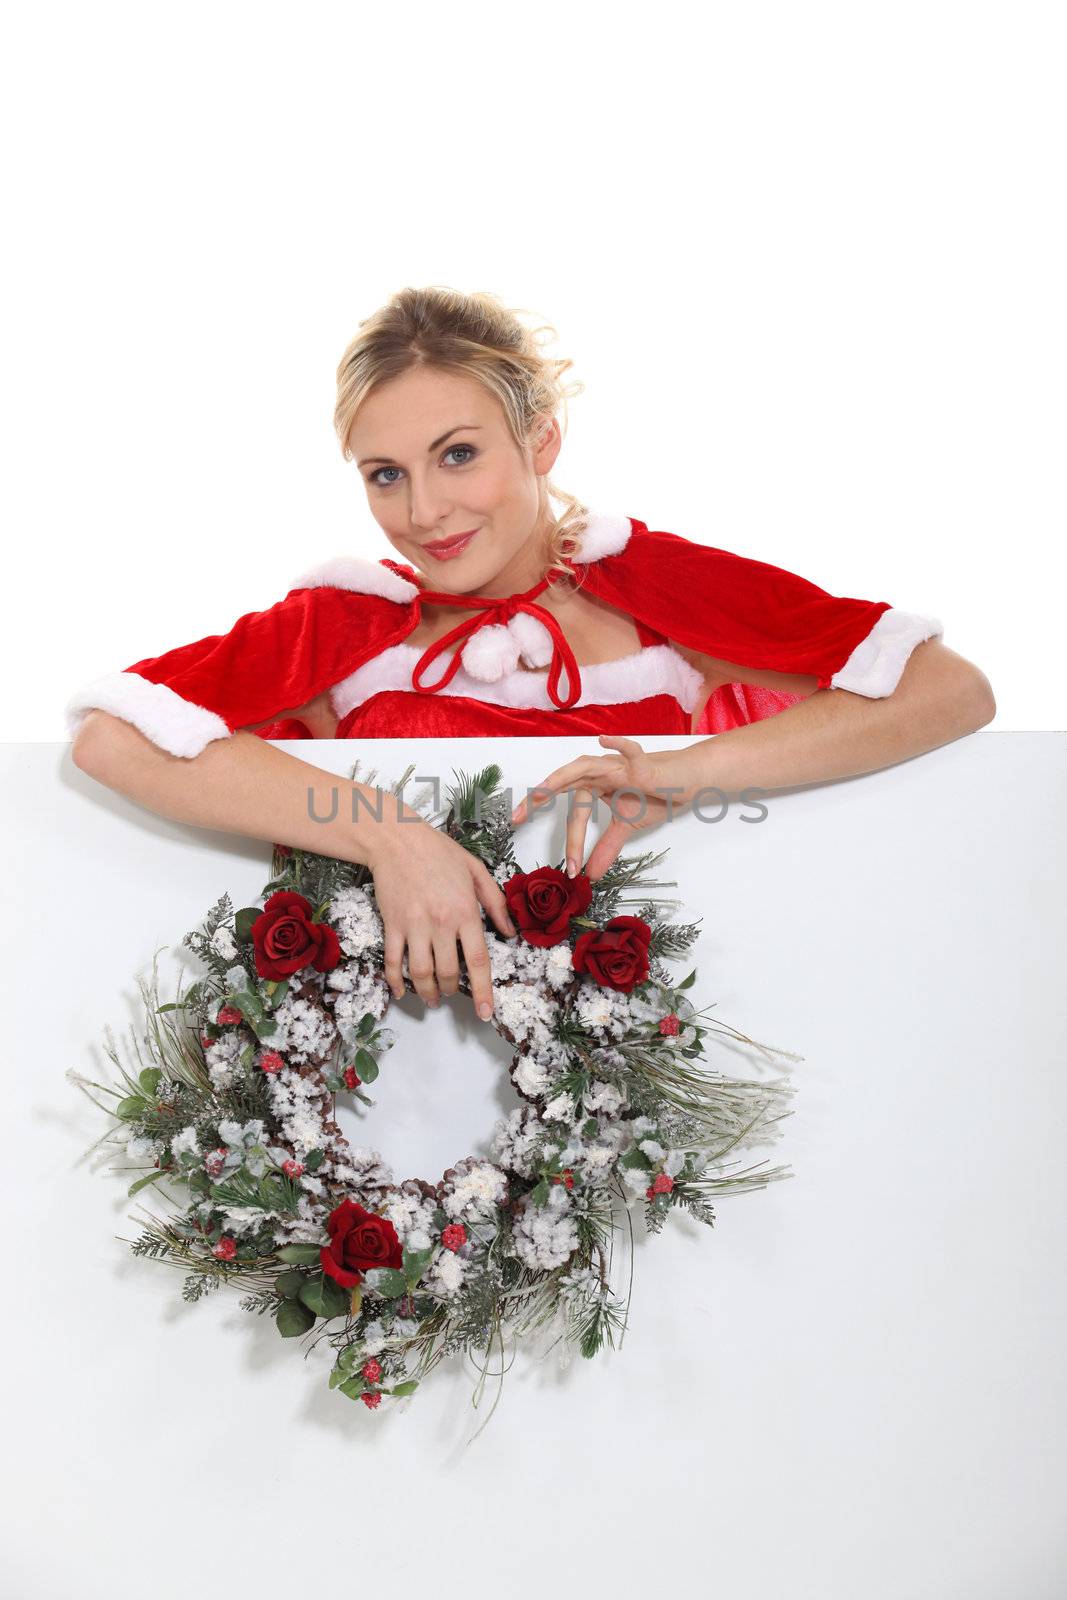 Woman dressed as Mrs. Claus and holding a wreath